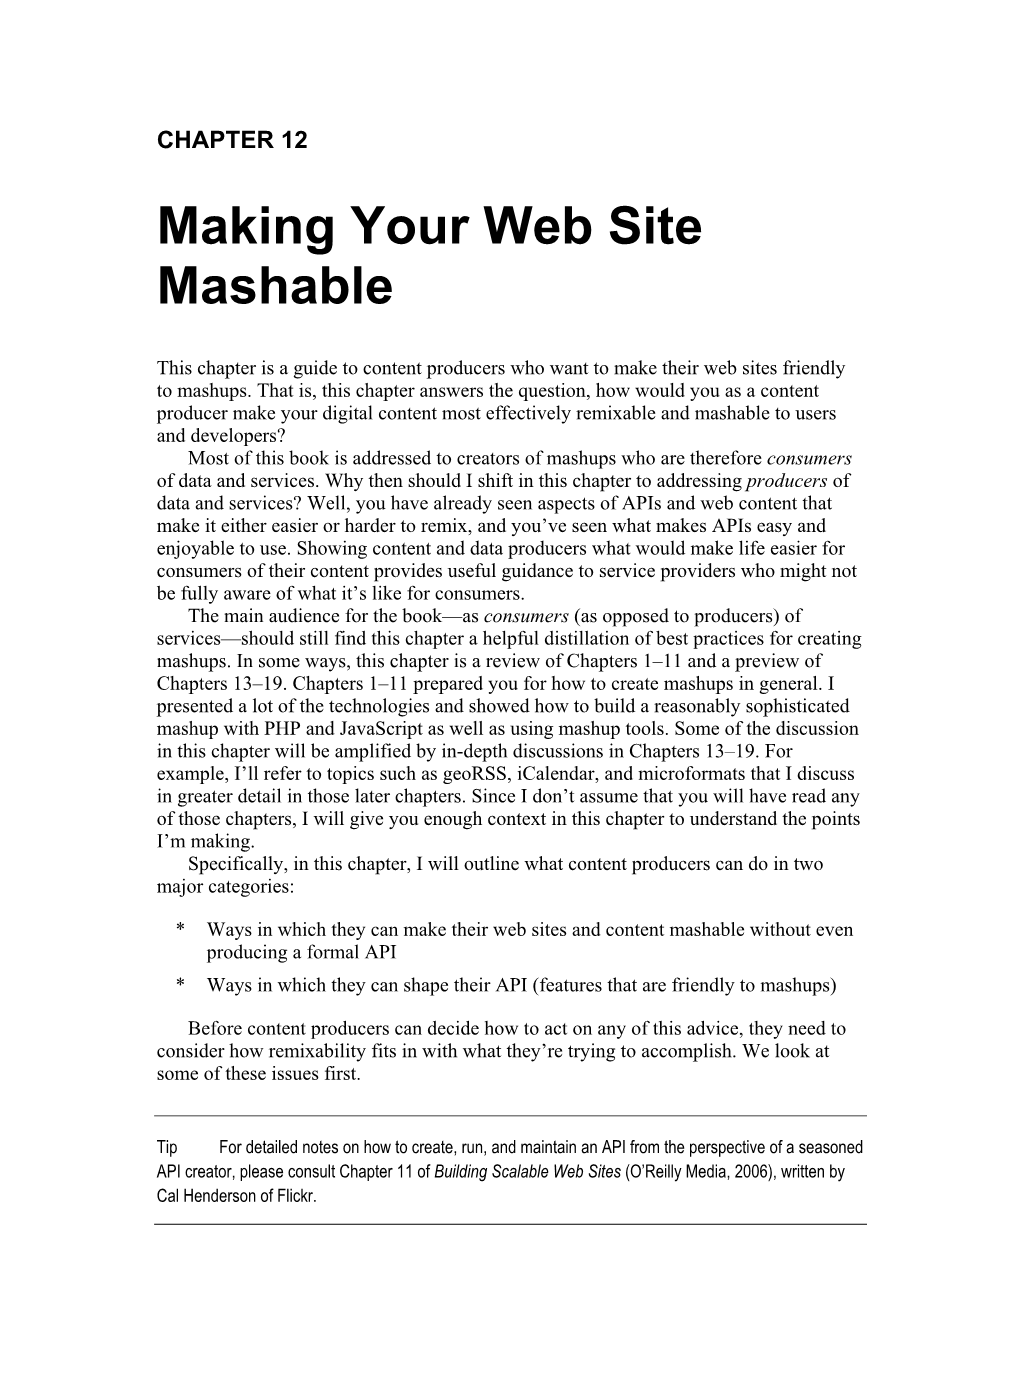 CHAPTER 12 Making Your Web Site Mashable